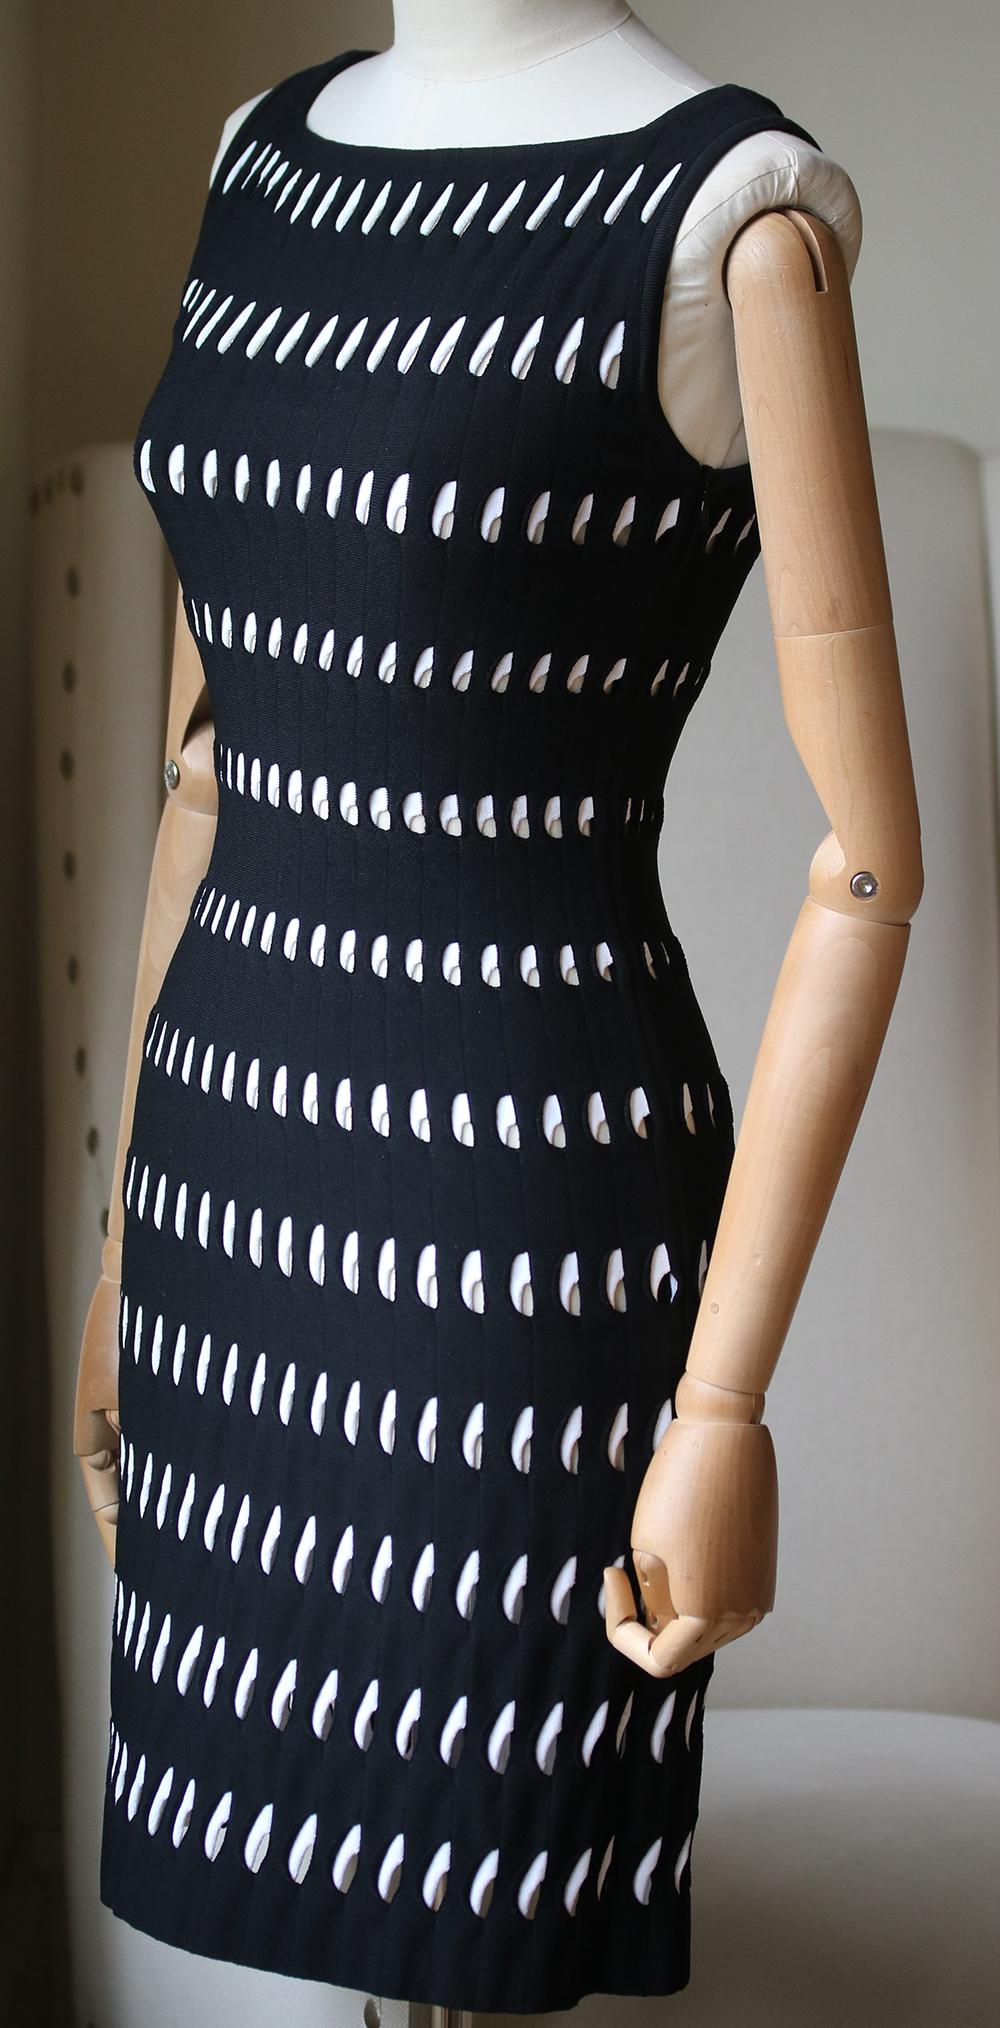 Azzedine Alaïa openwork fitted dress. This black and white knit dress is sleeveless with a high square neck. Bodycon fit. 83% Viscose, 17% polyester. Comes up small.

Size: FR 36 (UK 8, US 4, IT 40)

Condition: New with tags 